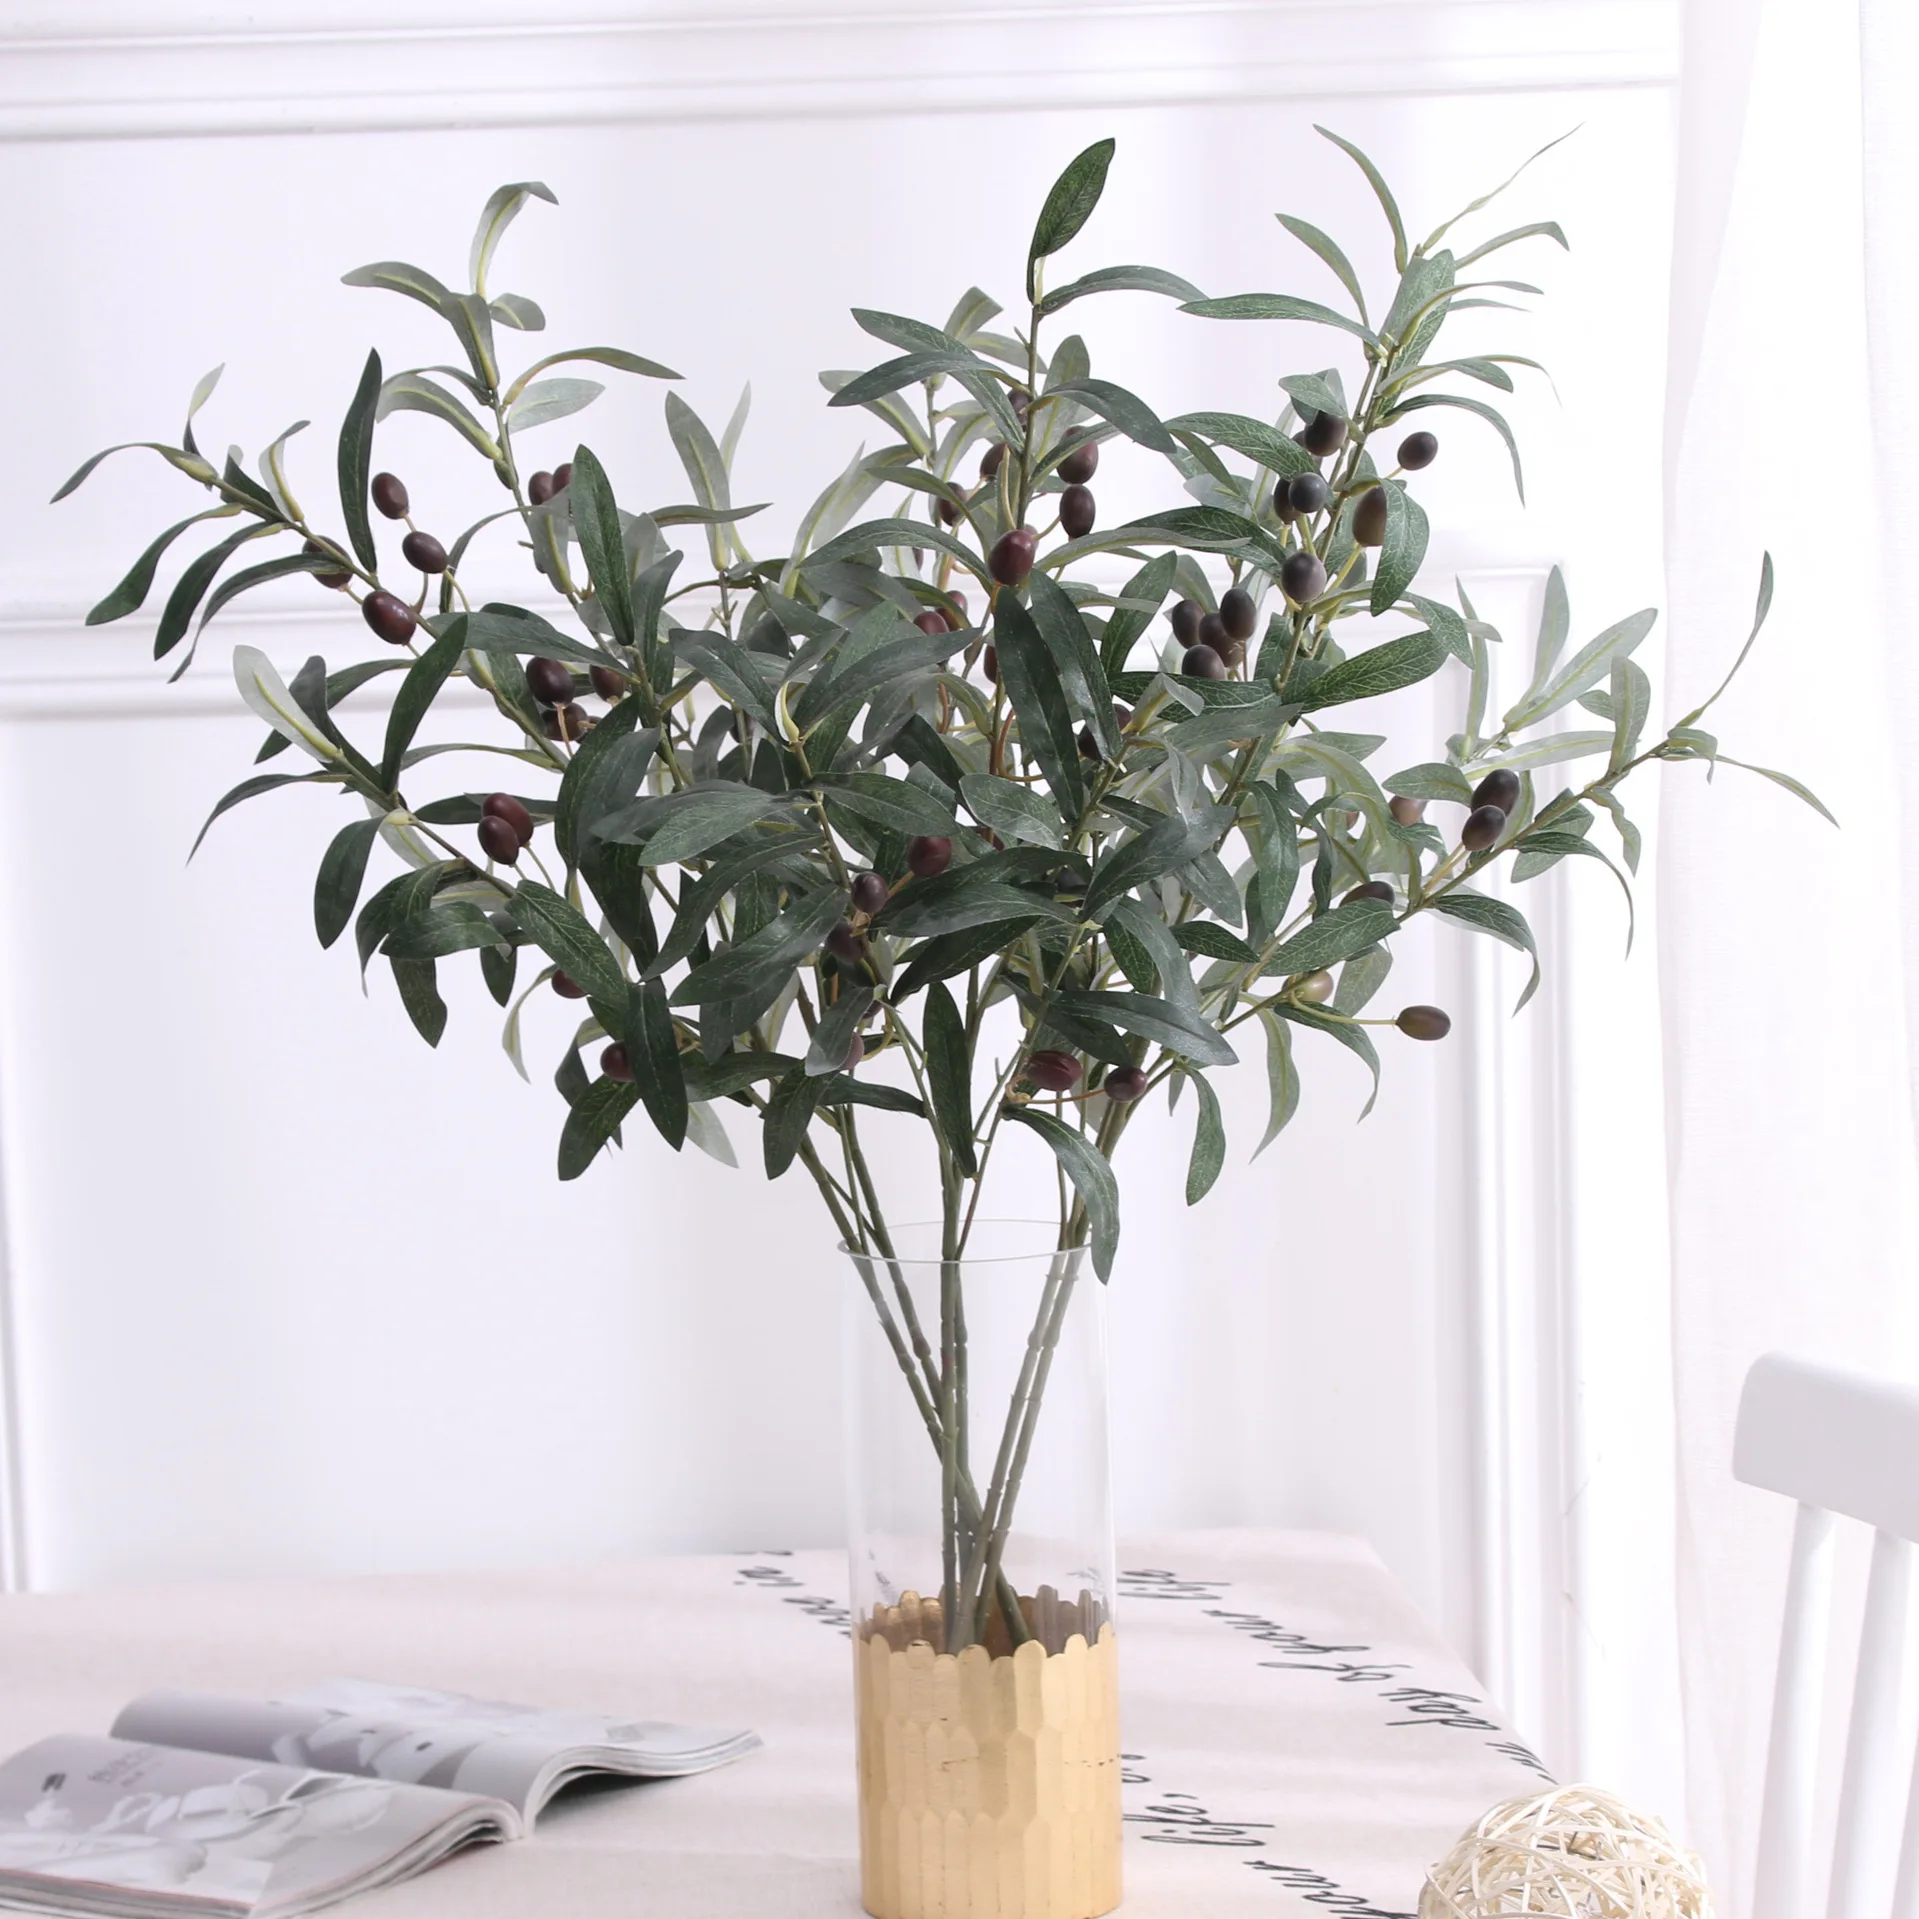 

JMLF1004-77CM Decorative 4 Forks Olive Tree Branch with Fruits For Home Decoration, Green